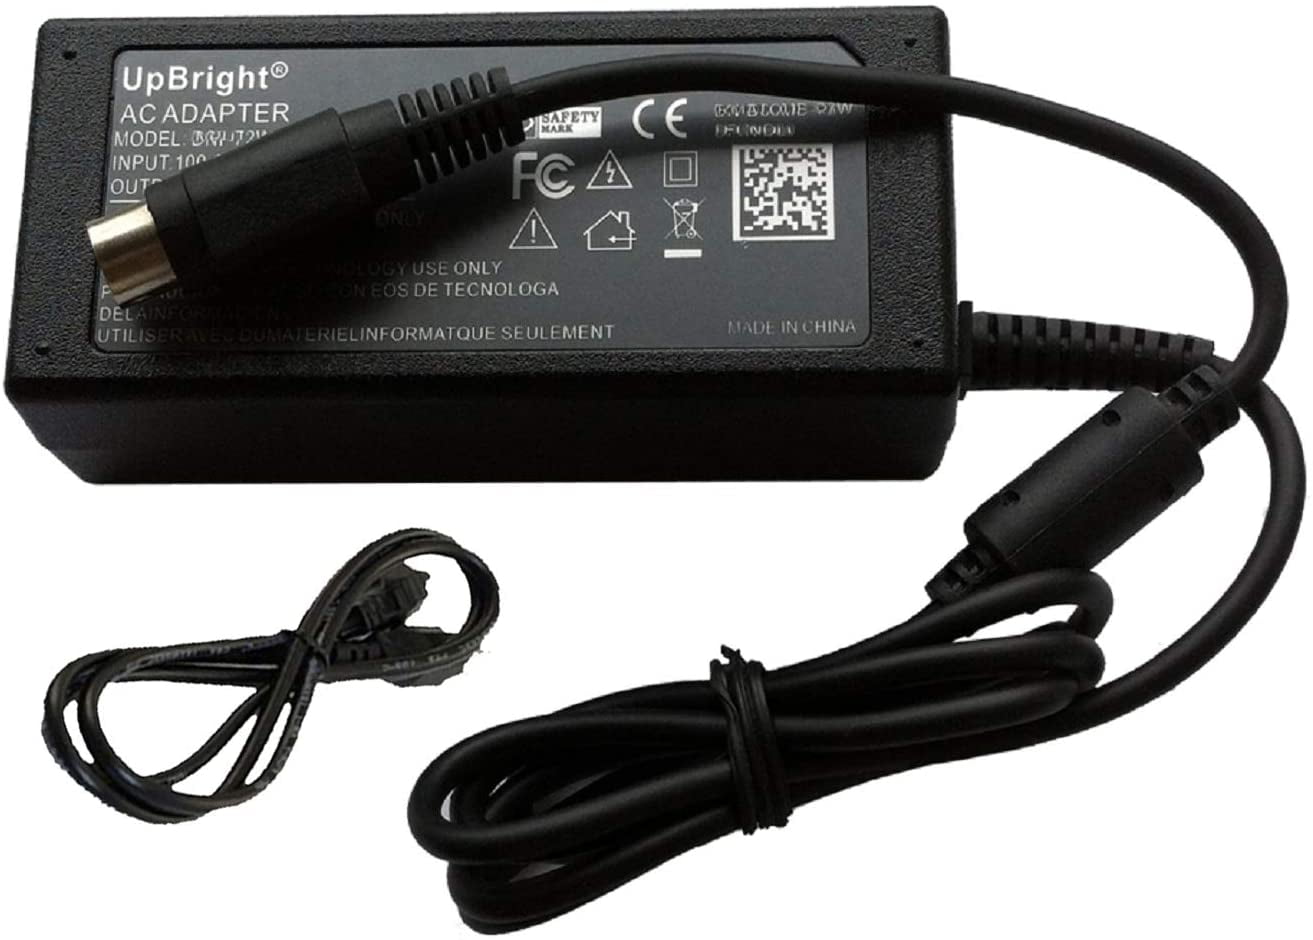 AC Adapter Switching Power Supply Cord Charger for HP F70 D5064S LCD Monitor 